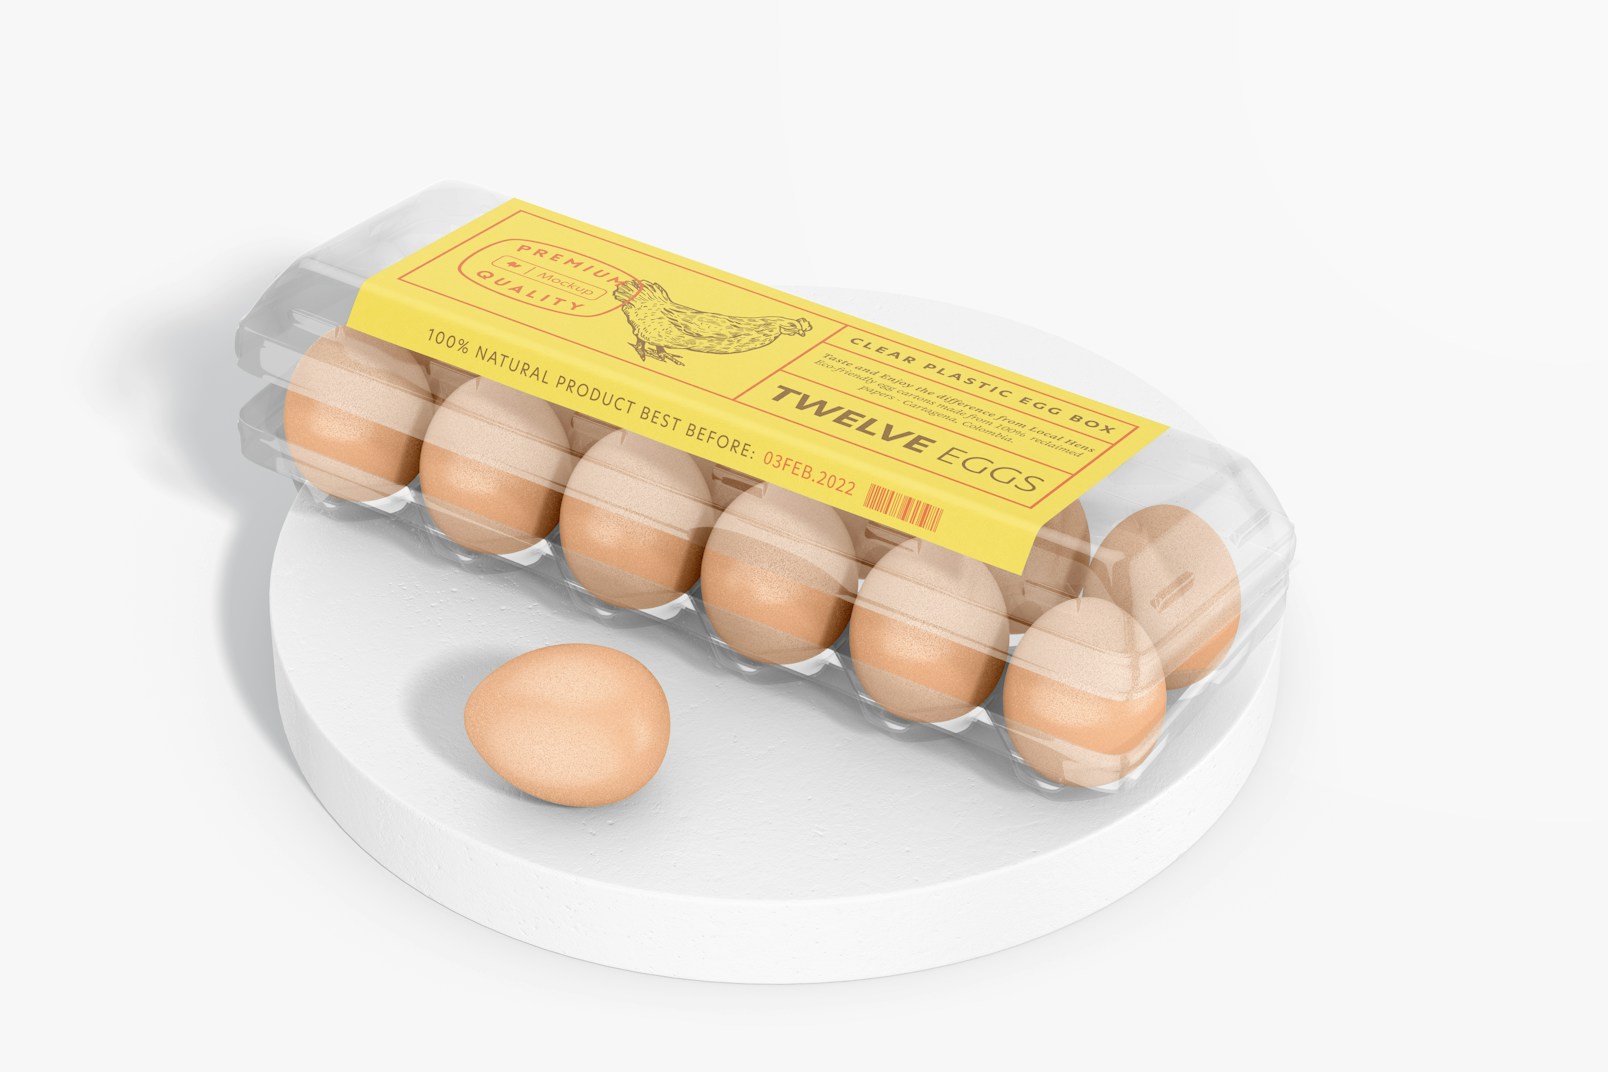 Clear Plastic Egg Box Mockup, On Surface